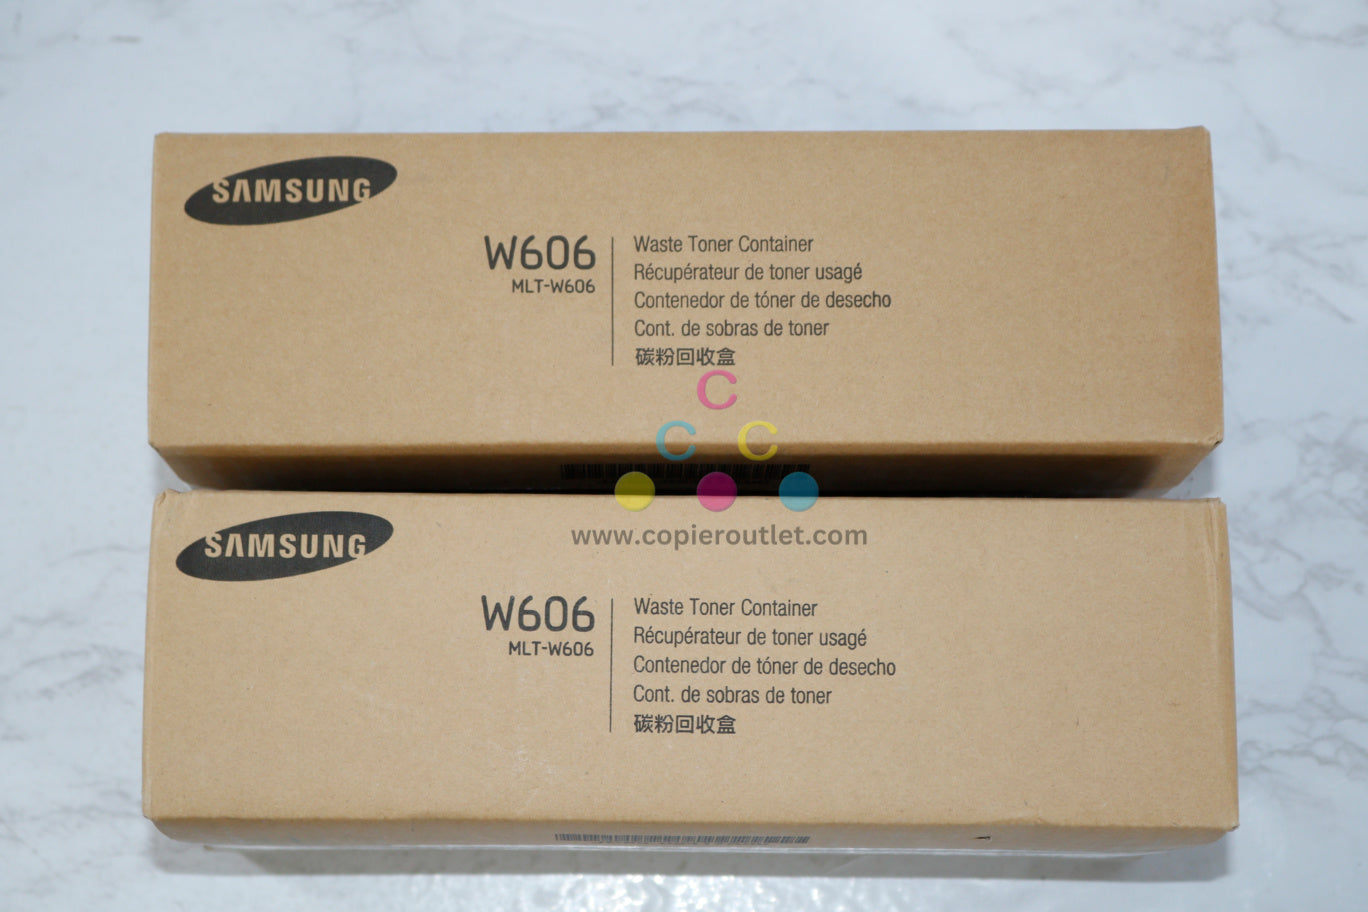 2 New OEM Samsung SCX-8030ND Waste Toner Container MLT-W606 (MLTW606)